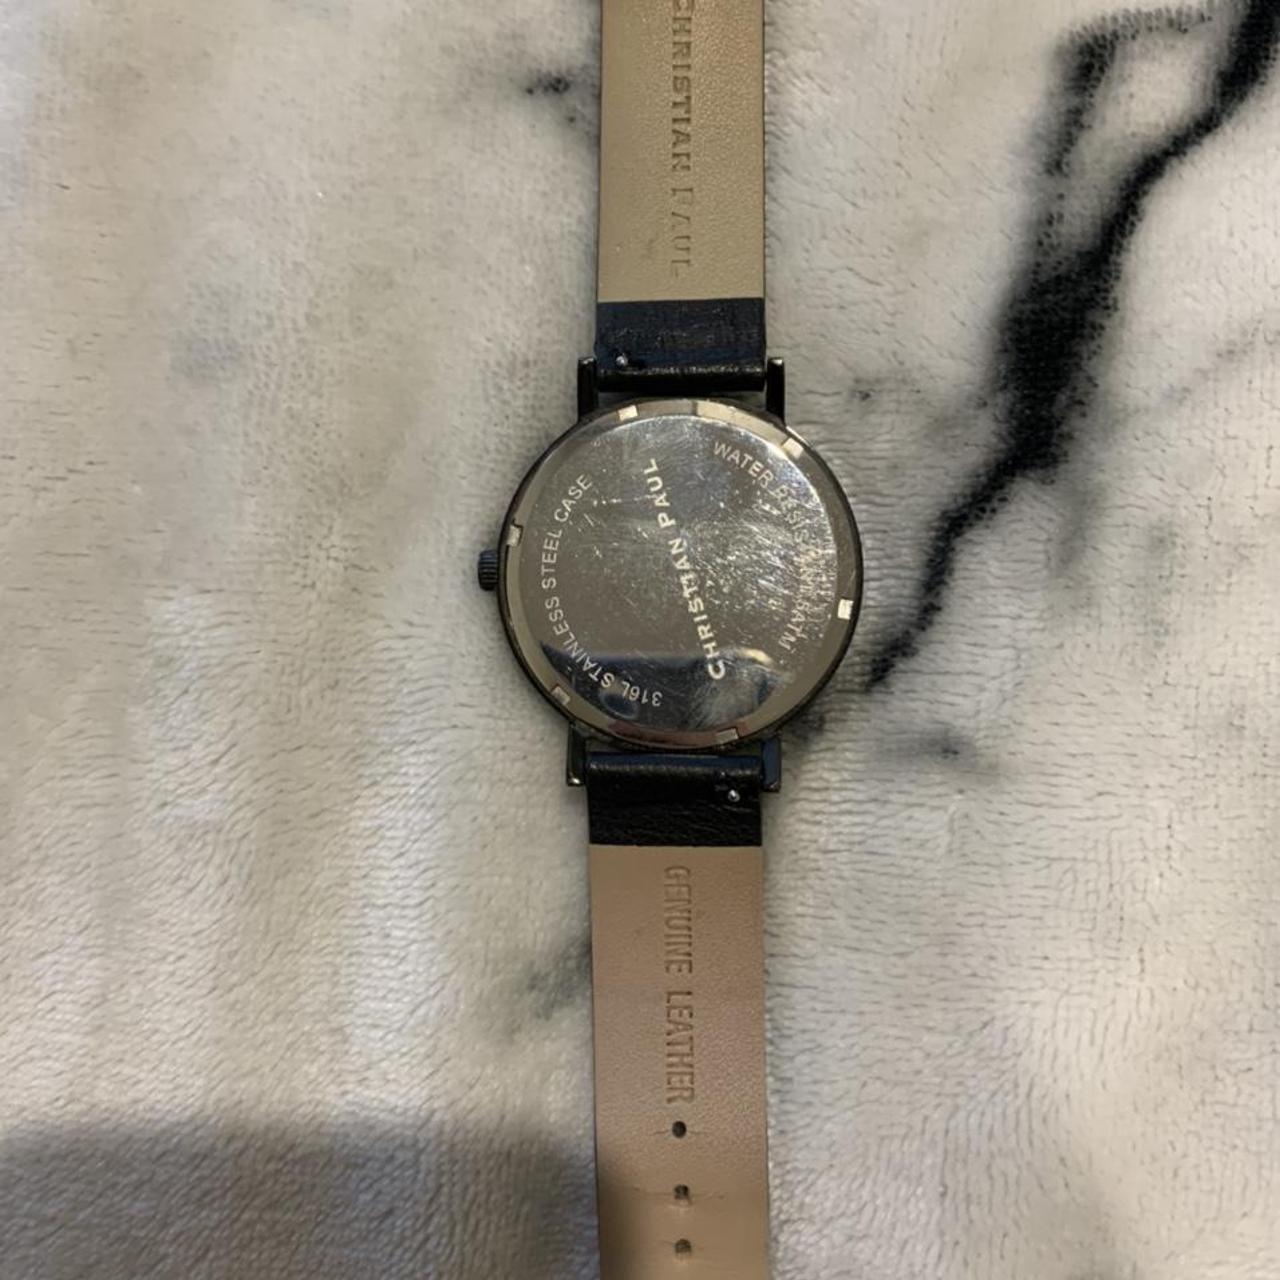 CHRISTIAN PAUL WATCH Leather/stainless steel. Small... - Depop